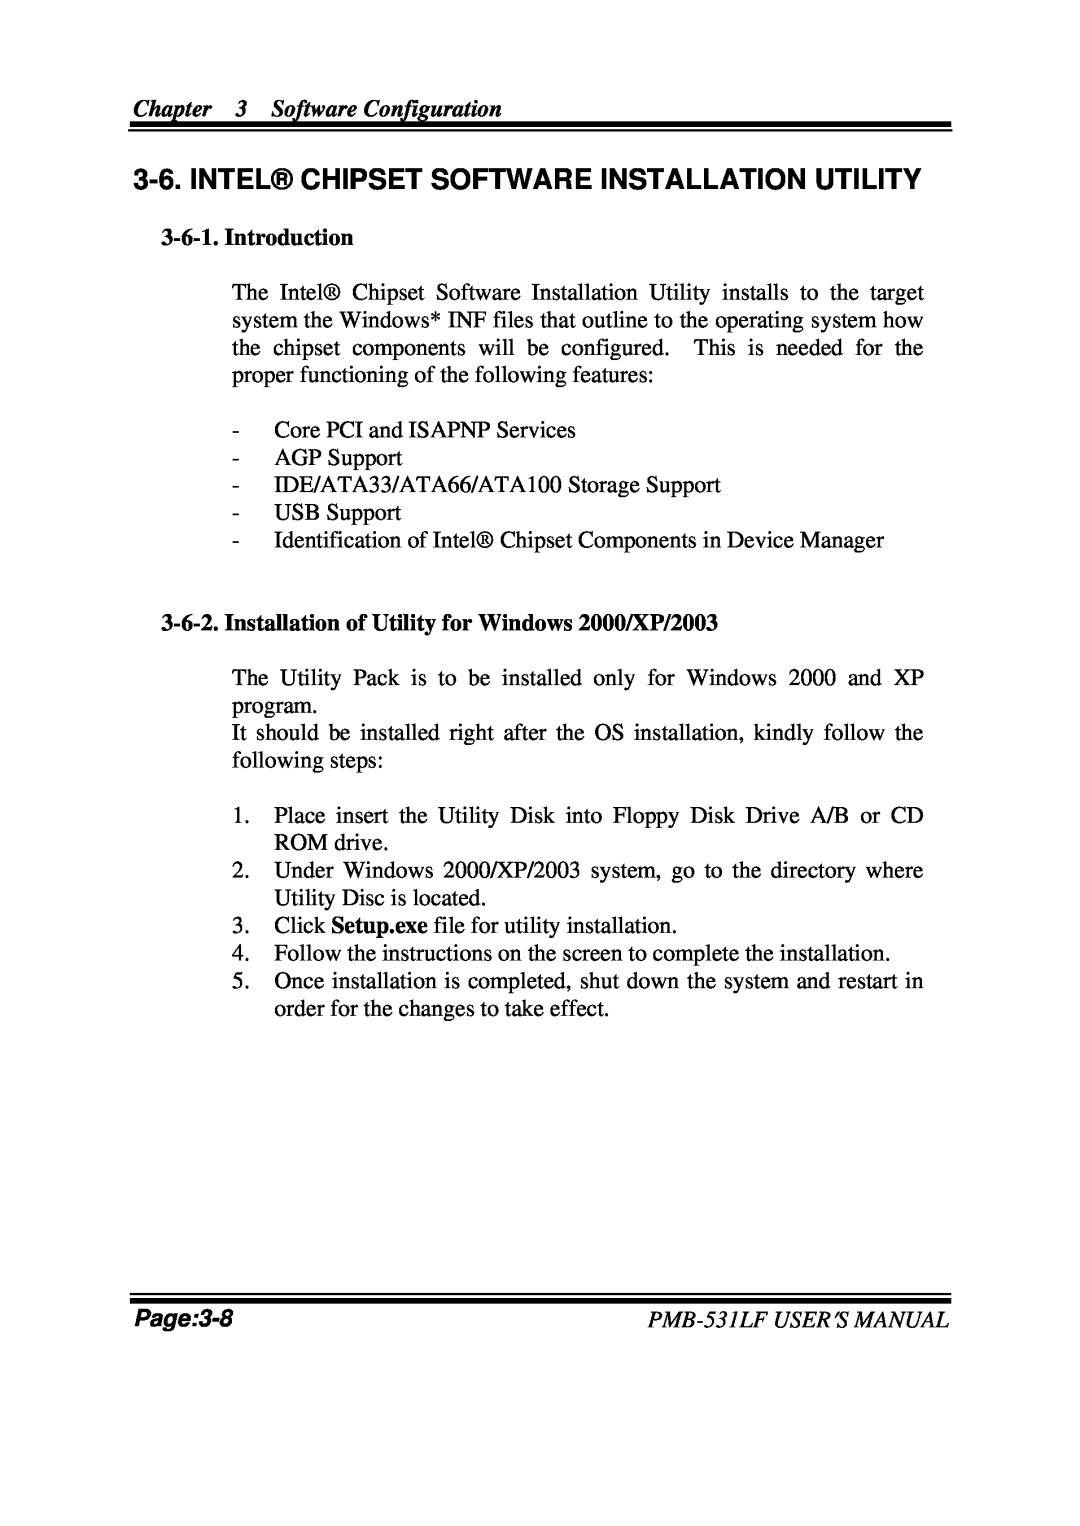 Intel PMB-531LF user manual Intel Chipset Software Installation Utility, Introduction, Page, Software Configuration 